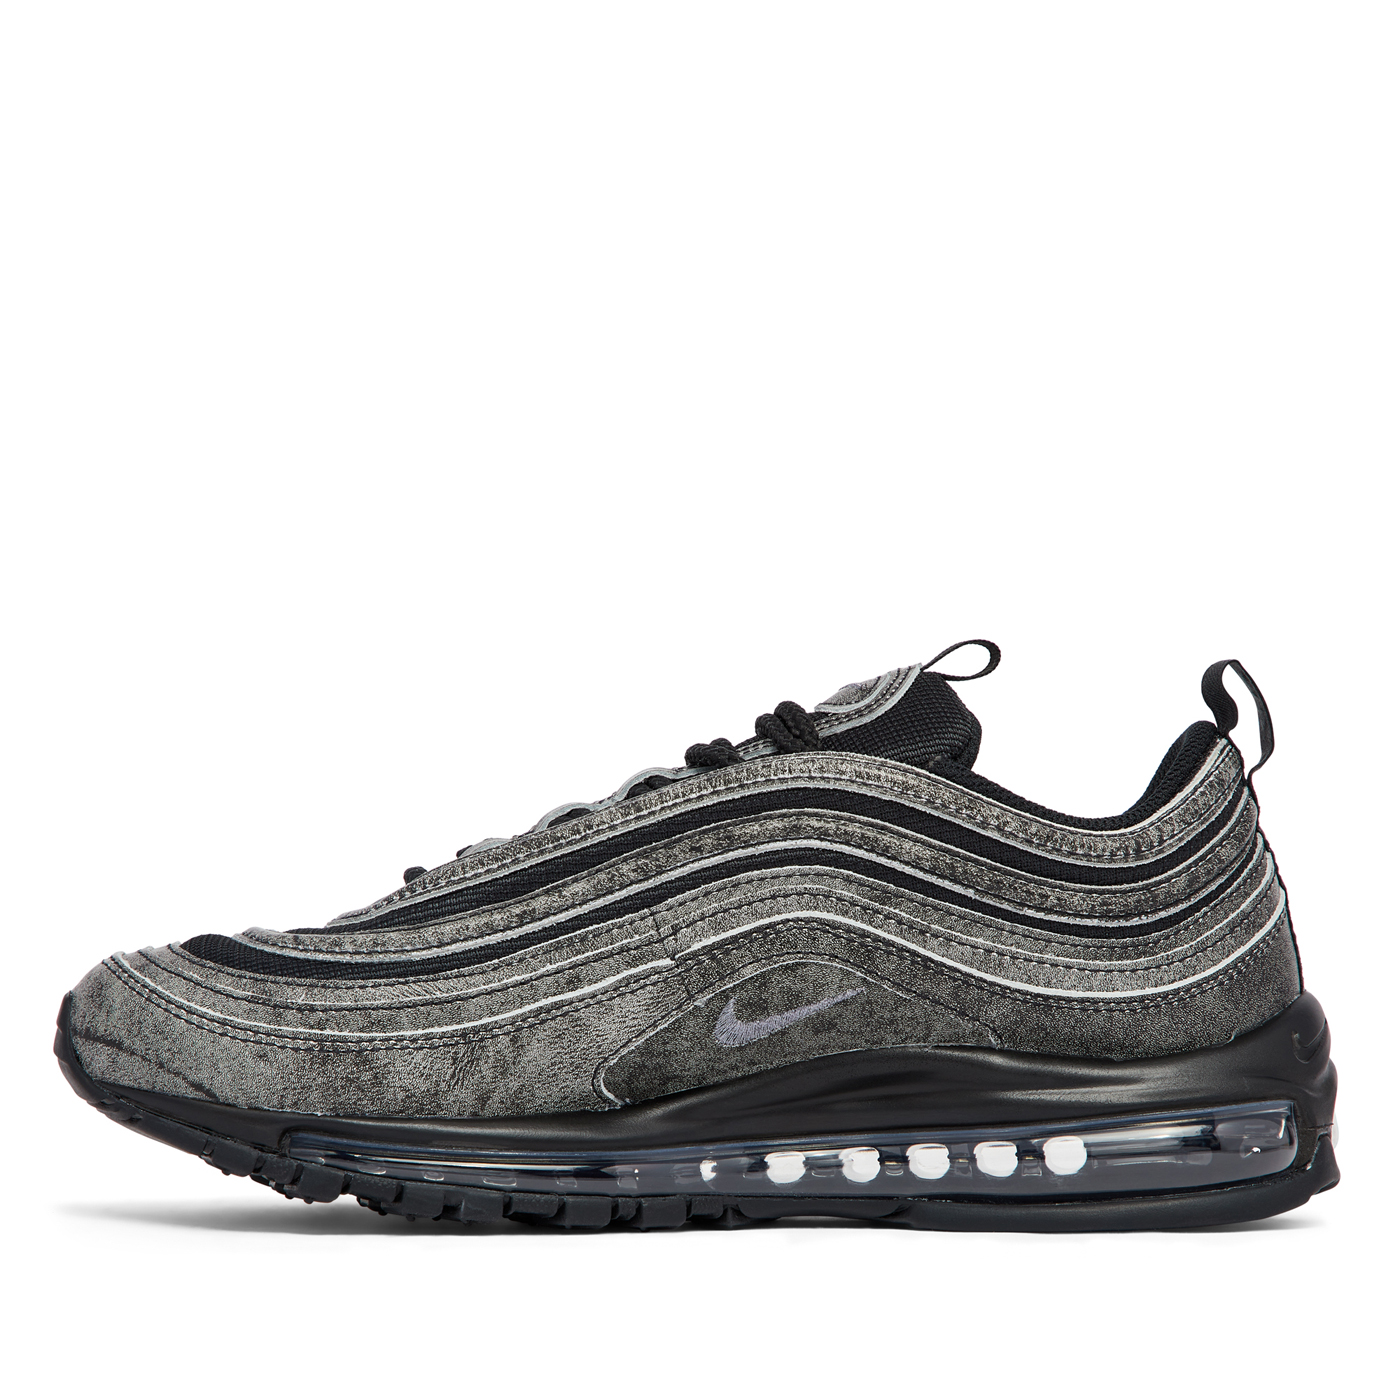 cdg-nike-air-max-97-release-information (12)